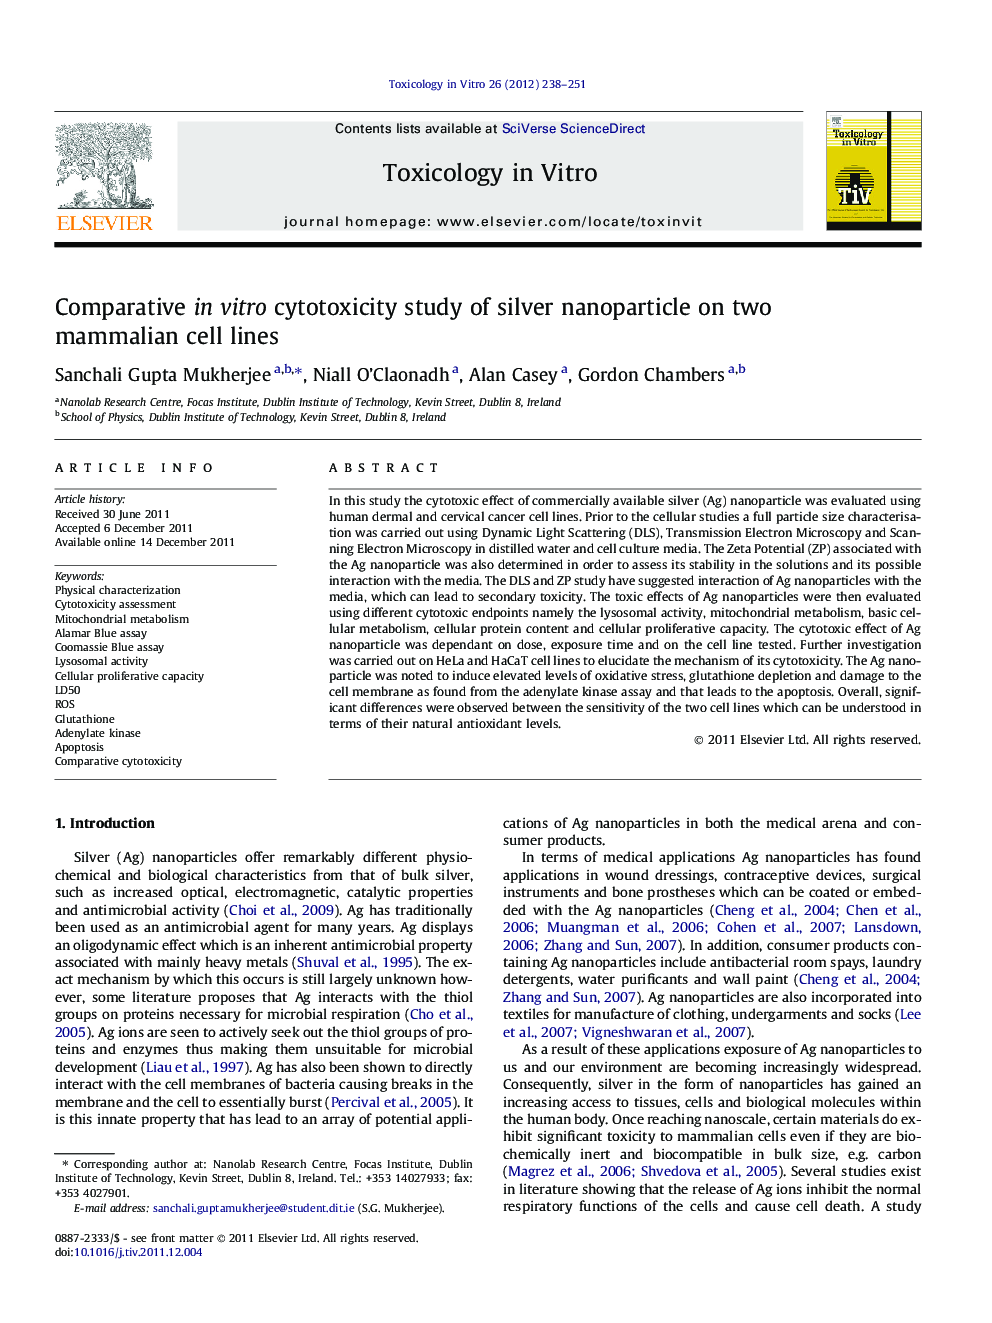 Comparative in vitro cytotoxicity study of silver nanoparticle on two mammalian cell lines